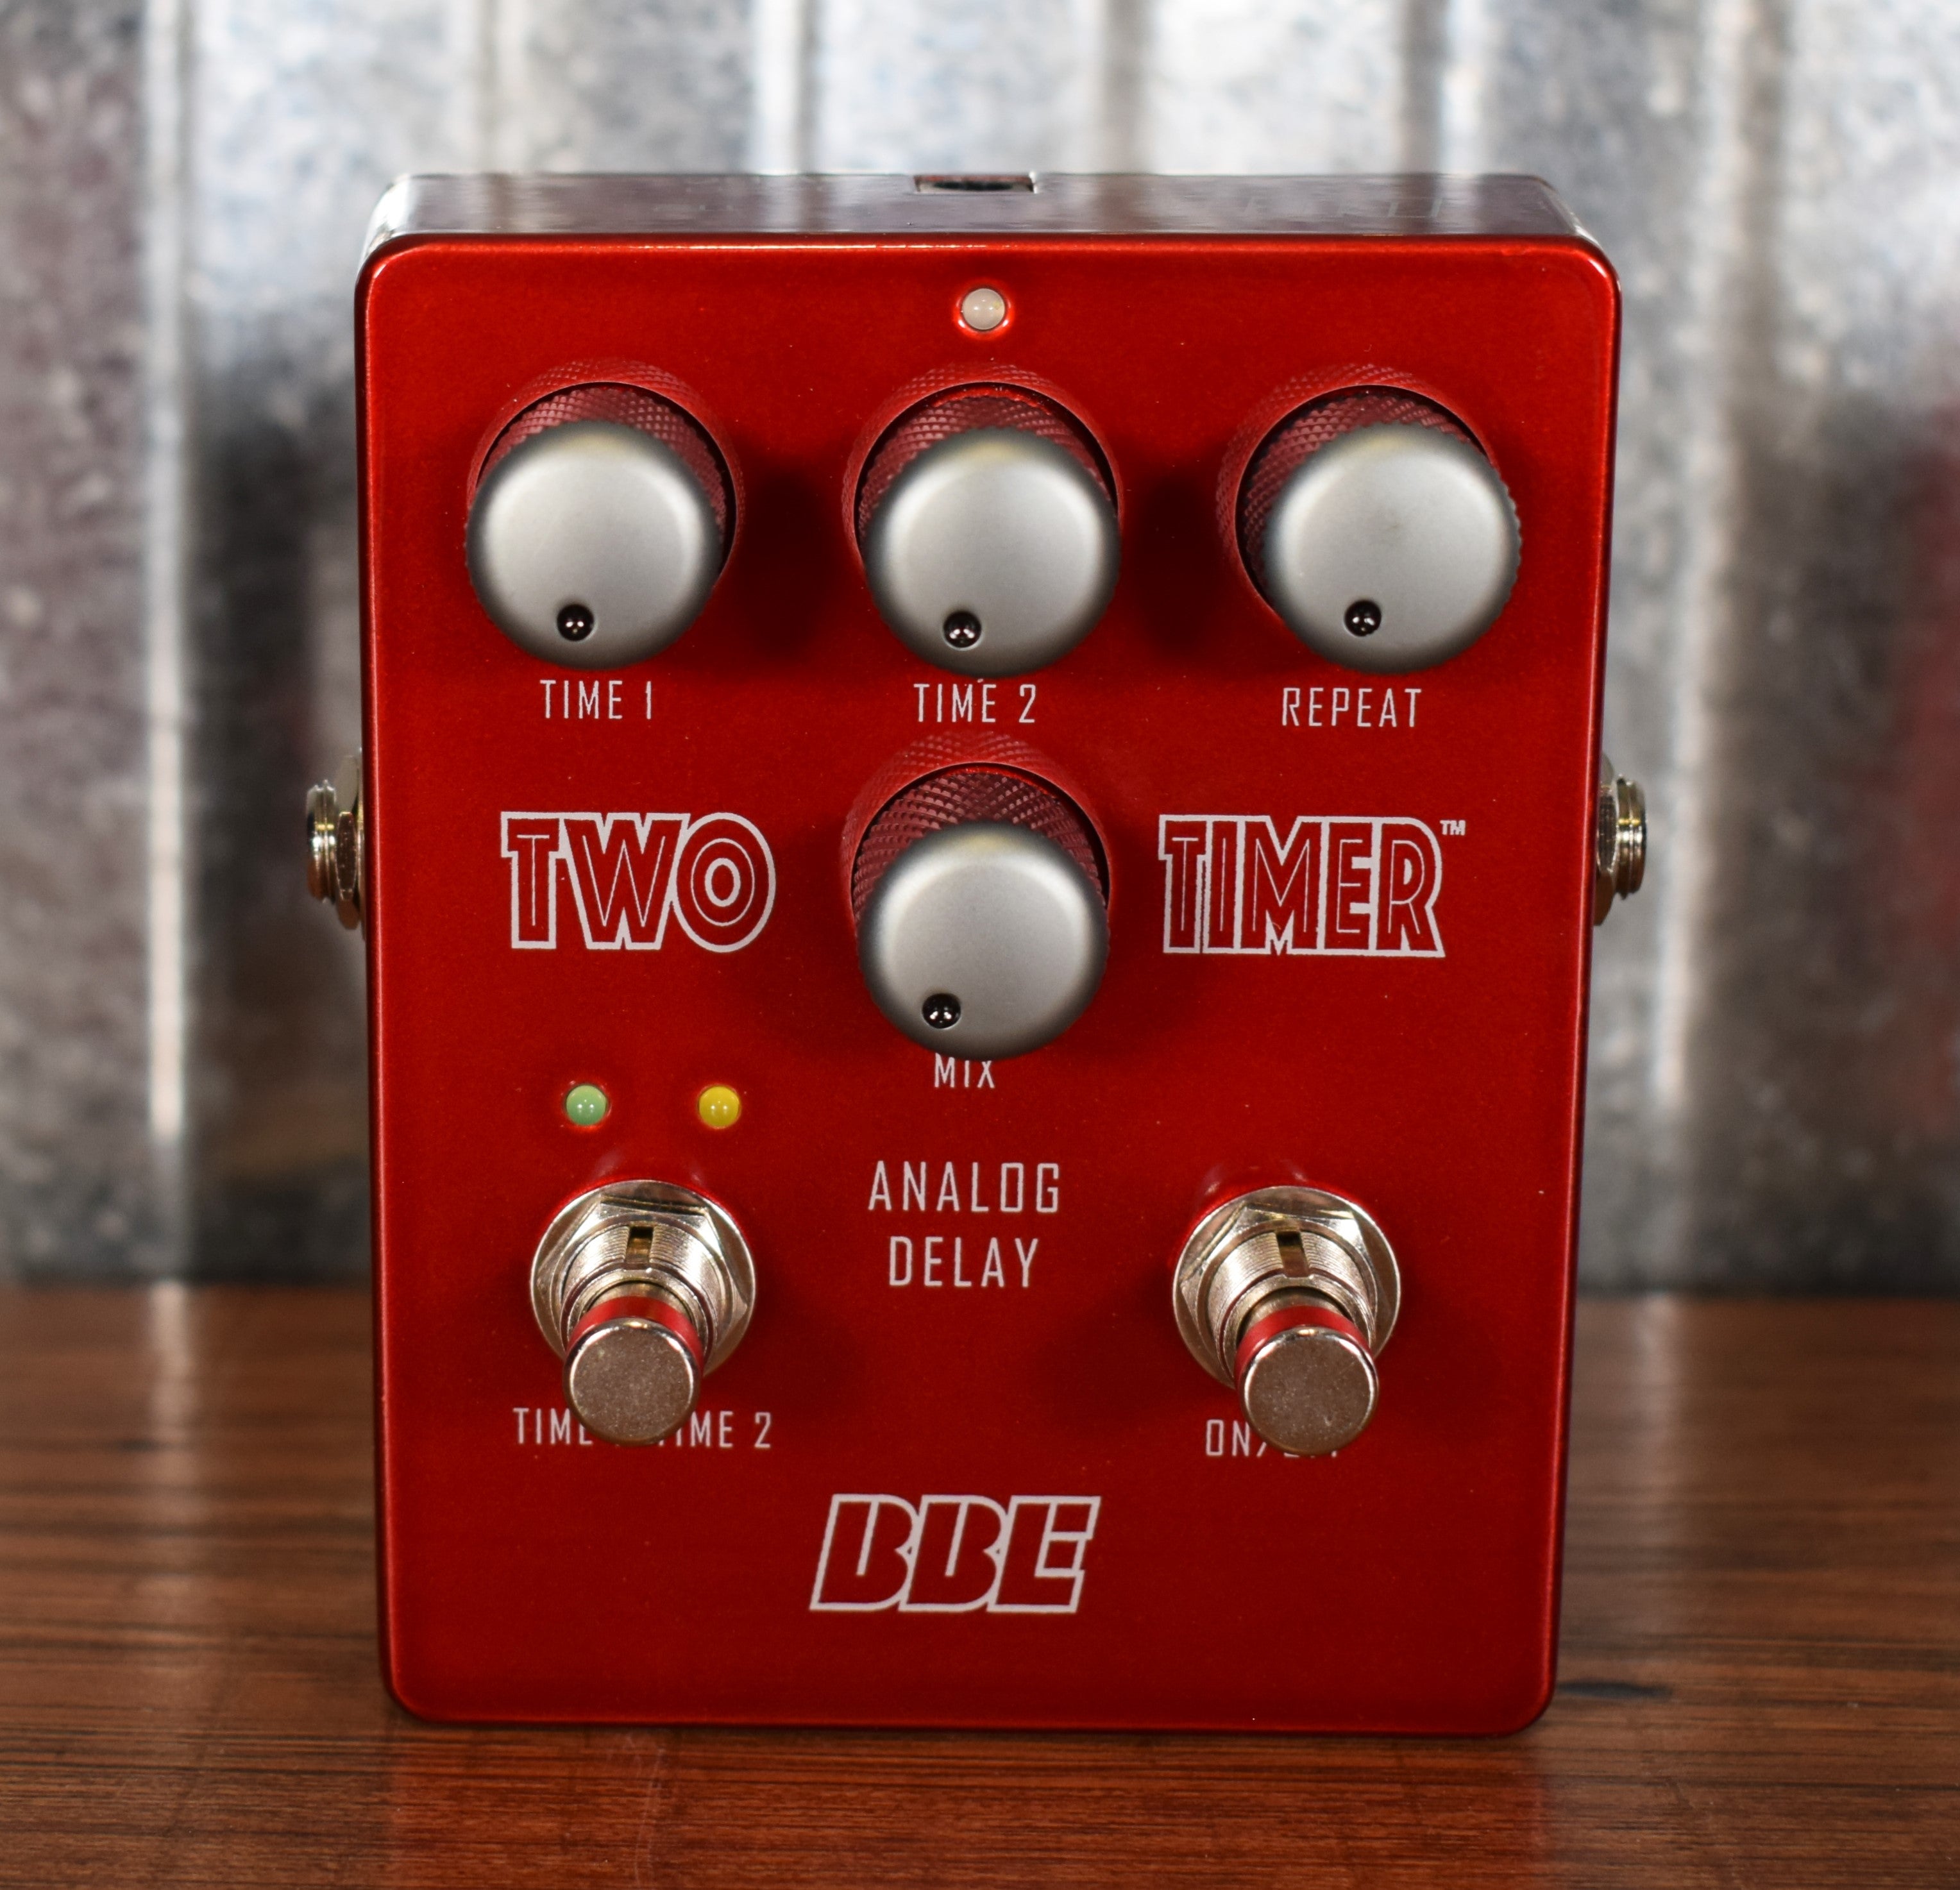 Analog　Guitar　Sound　BBE　Two　Delay　TT-2　Timer　Effect　Specialty　Pedal　–　Traders